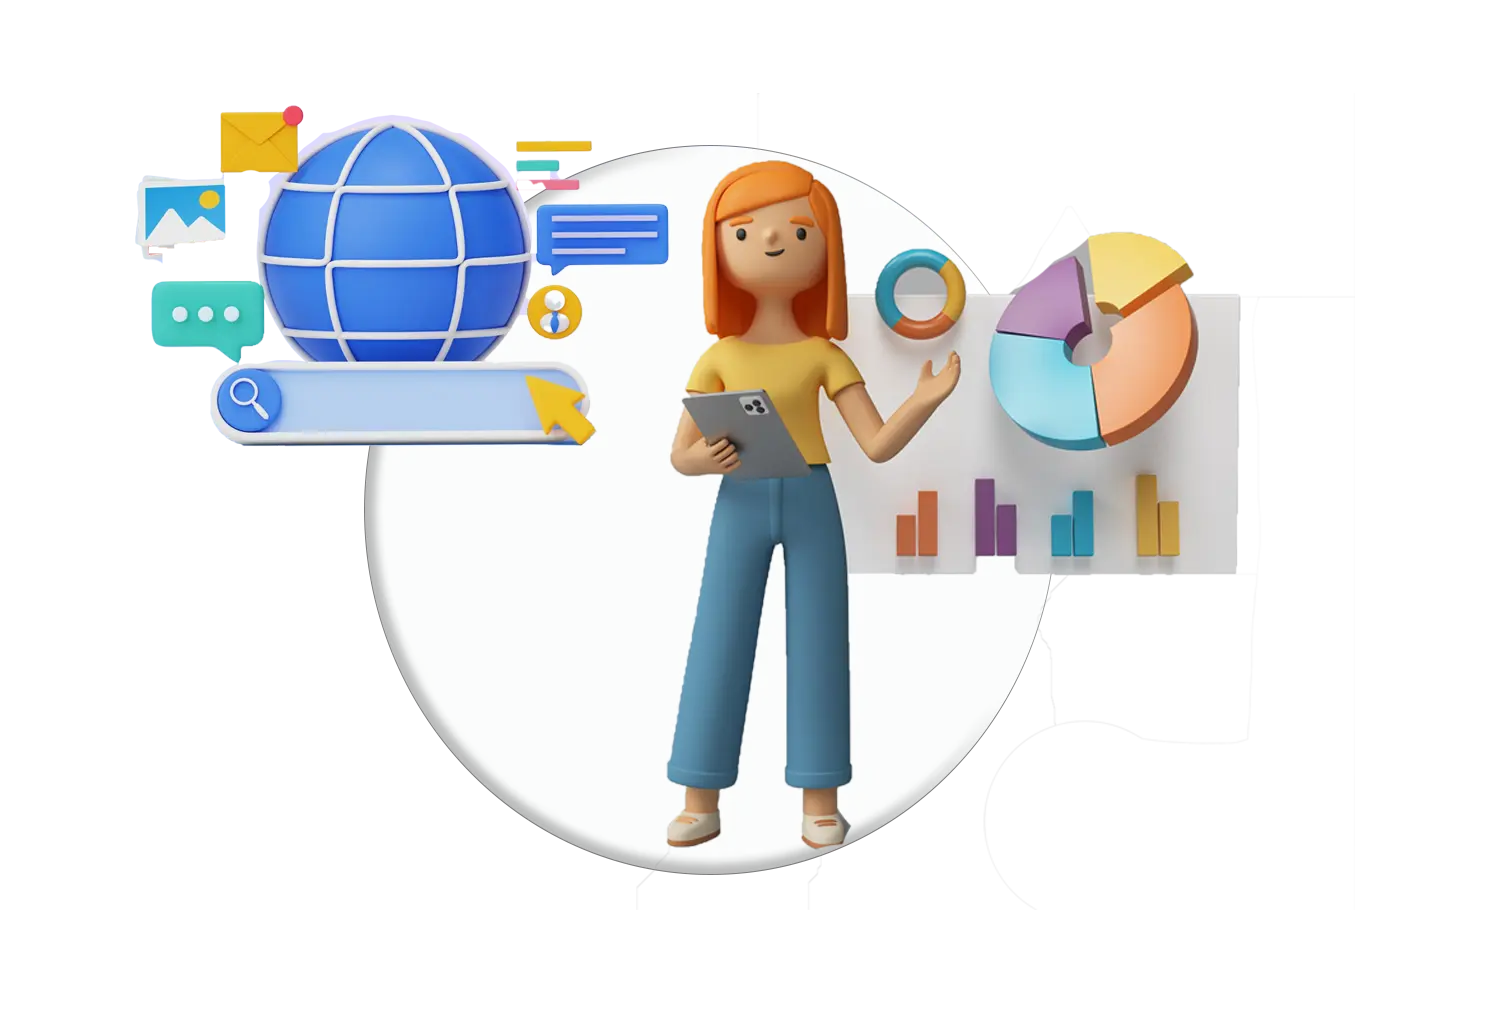 An animated image of an SEO expert with a bunch of charts floating around her